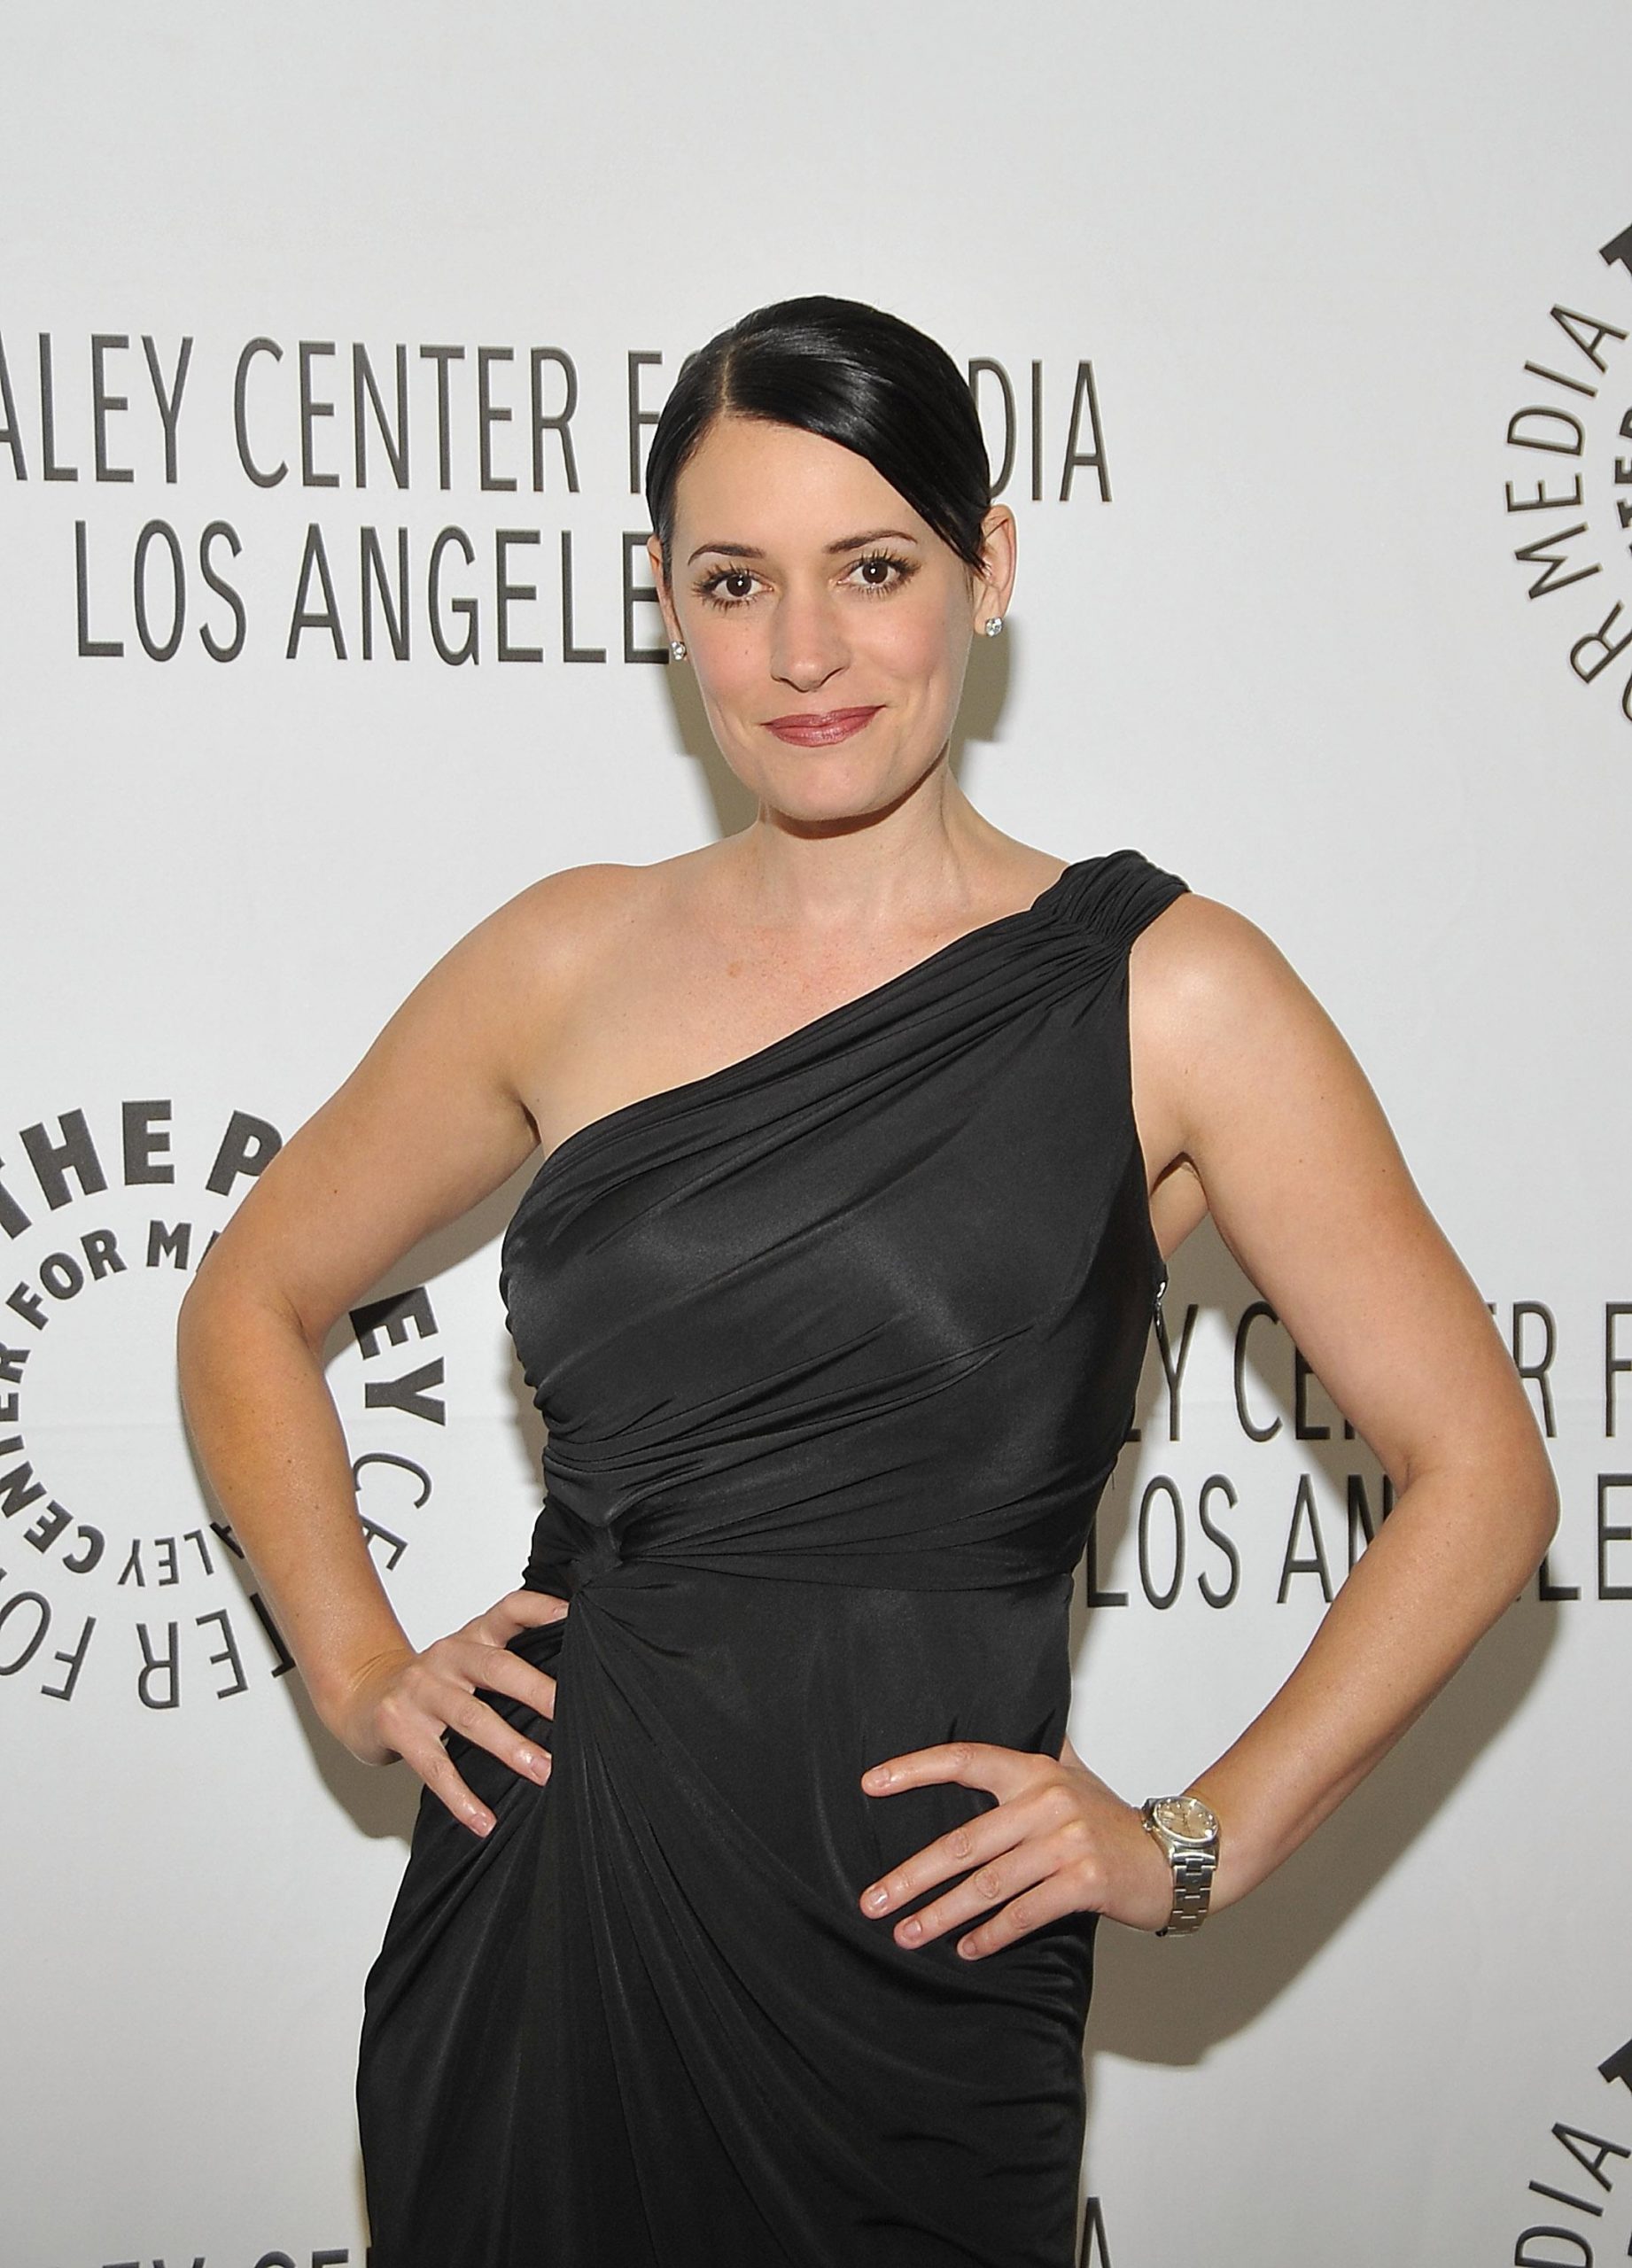 70+ Hot Pictures Of Paget Brewster From Criminal Minds Will Brighten Up Your Day 138